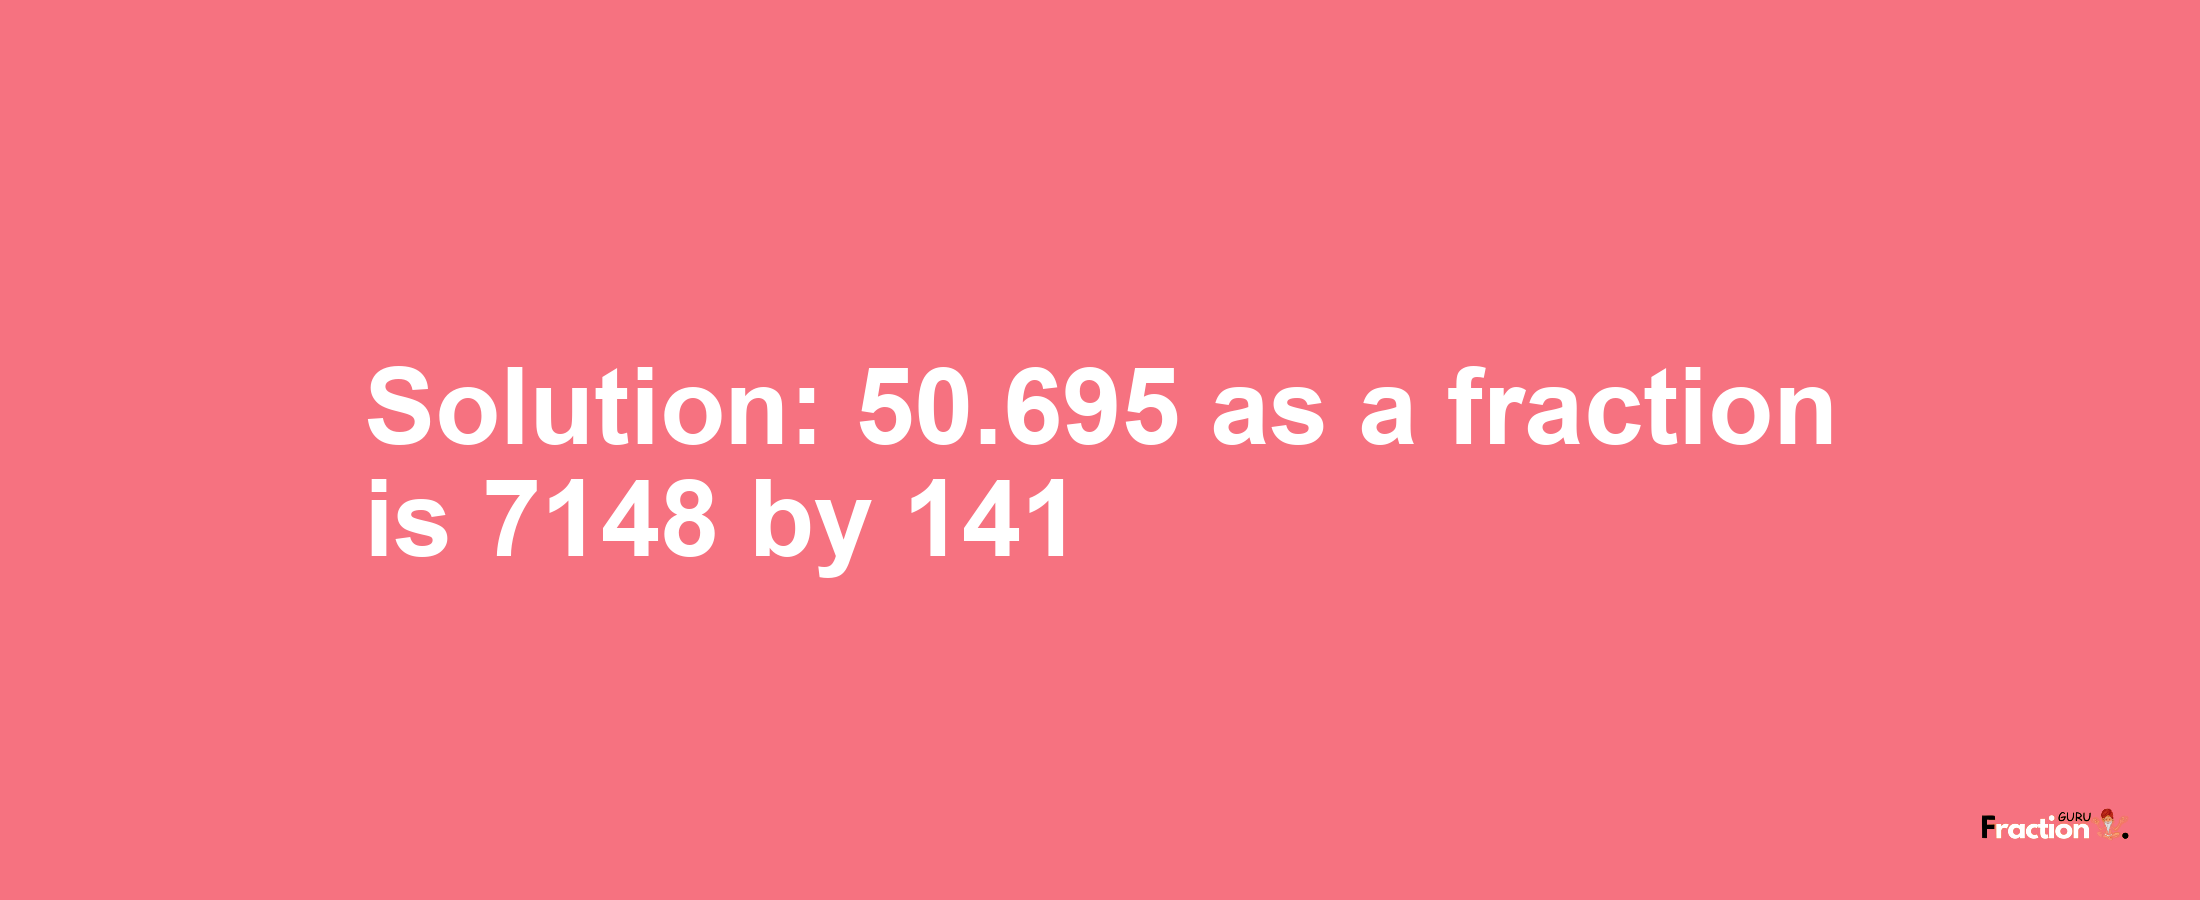 Solution:50.695 as a fraction is 7148/141